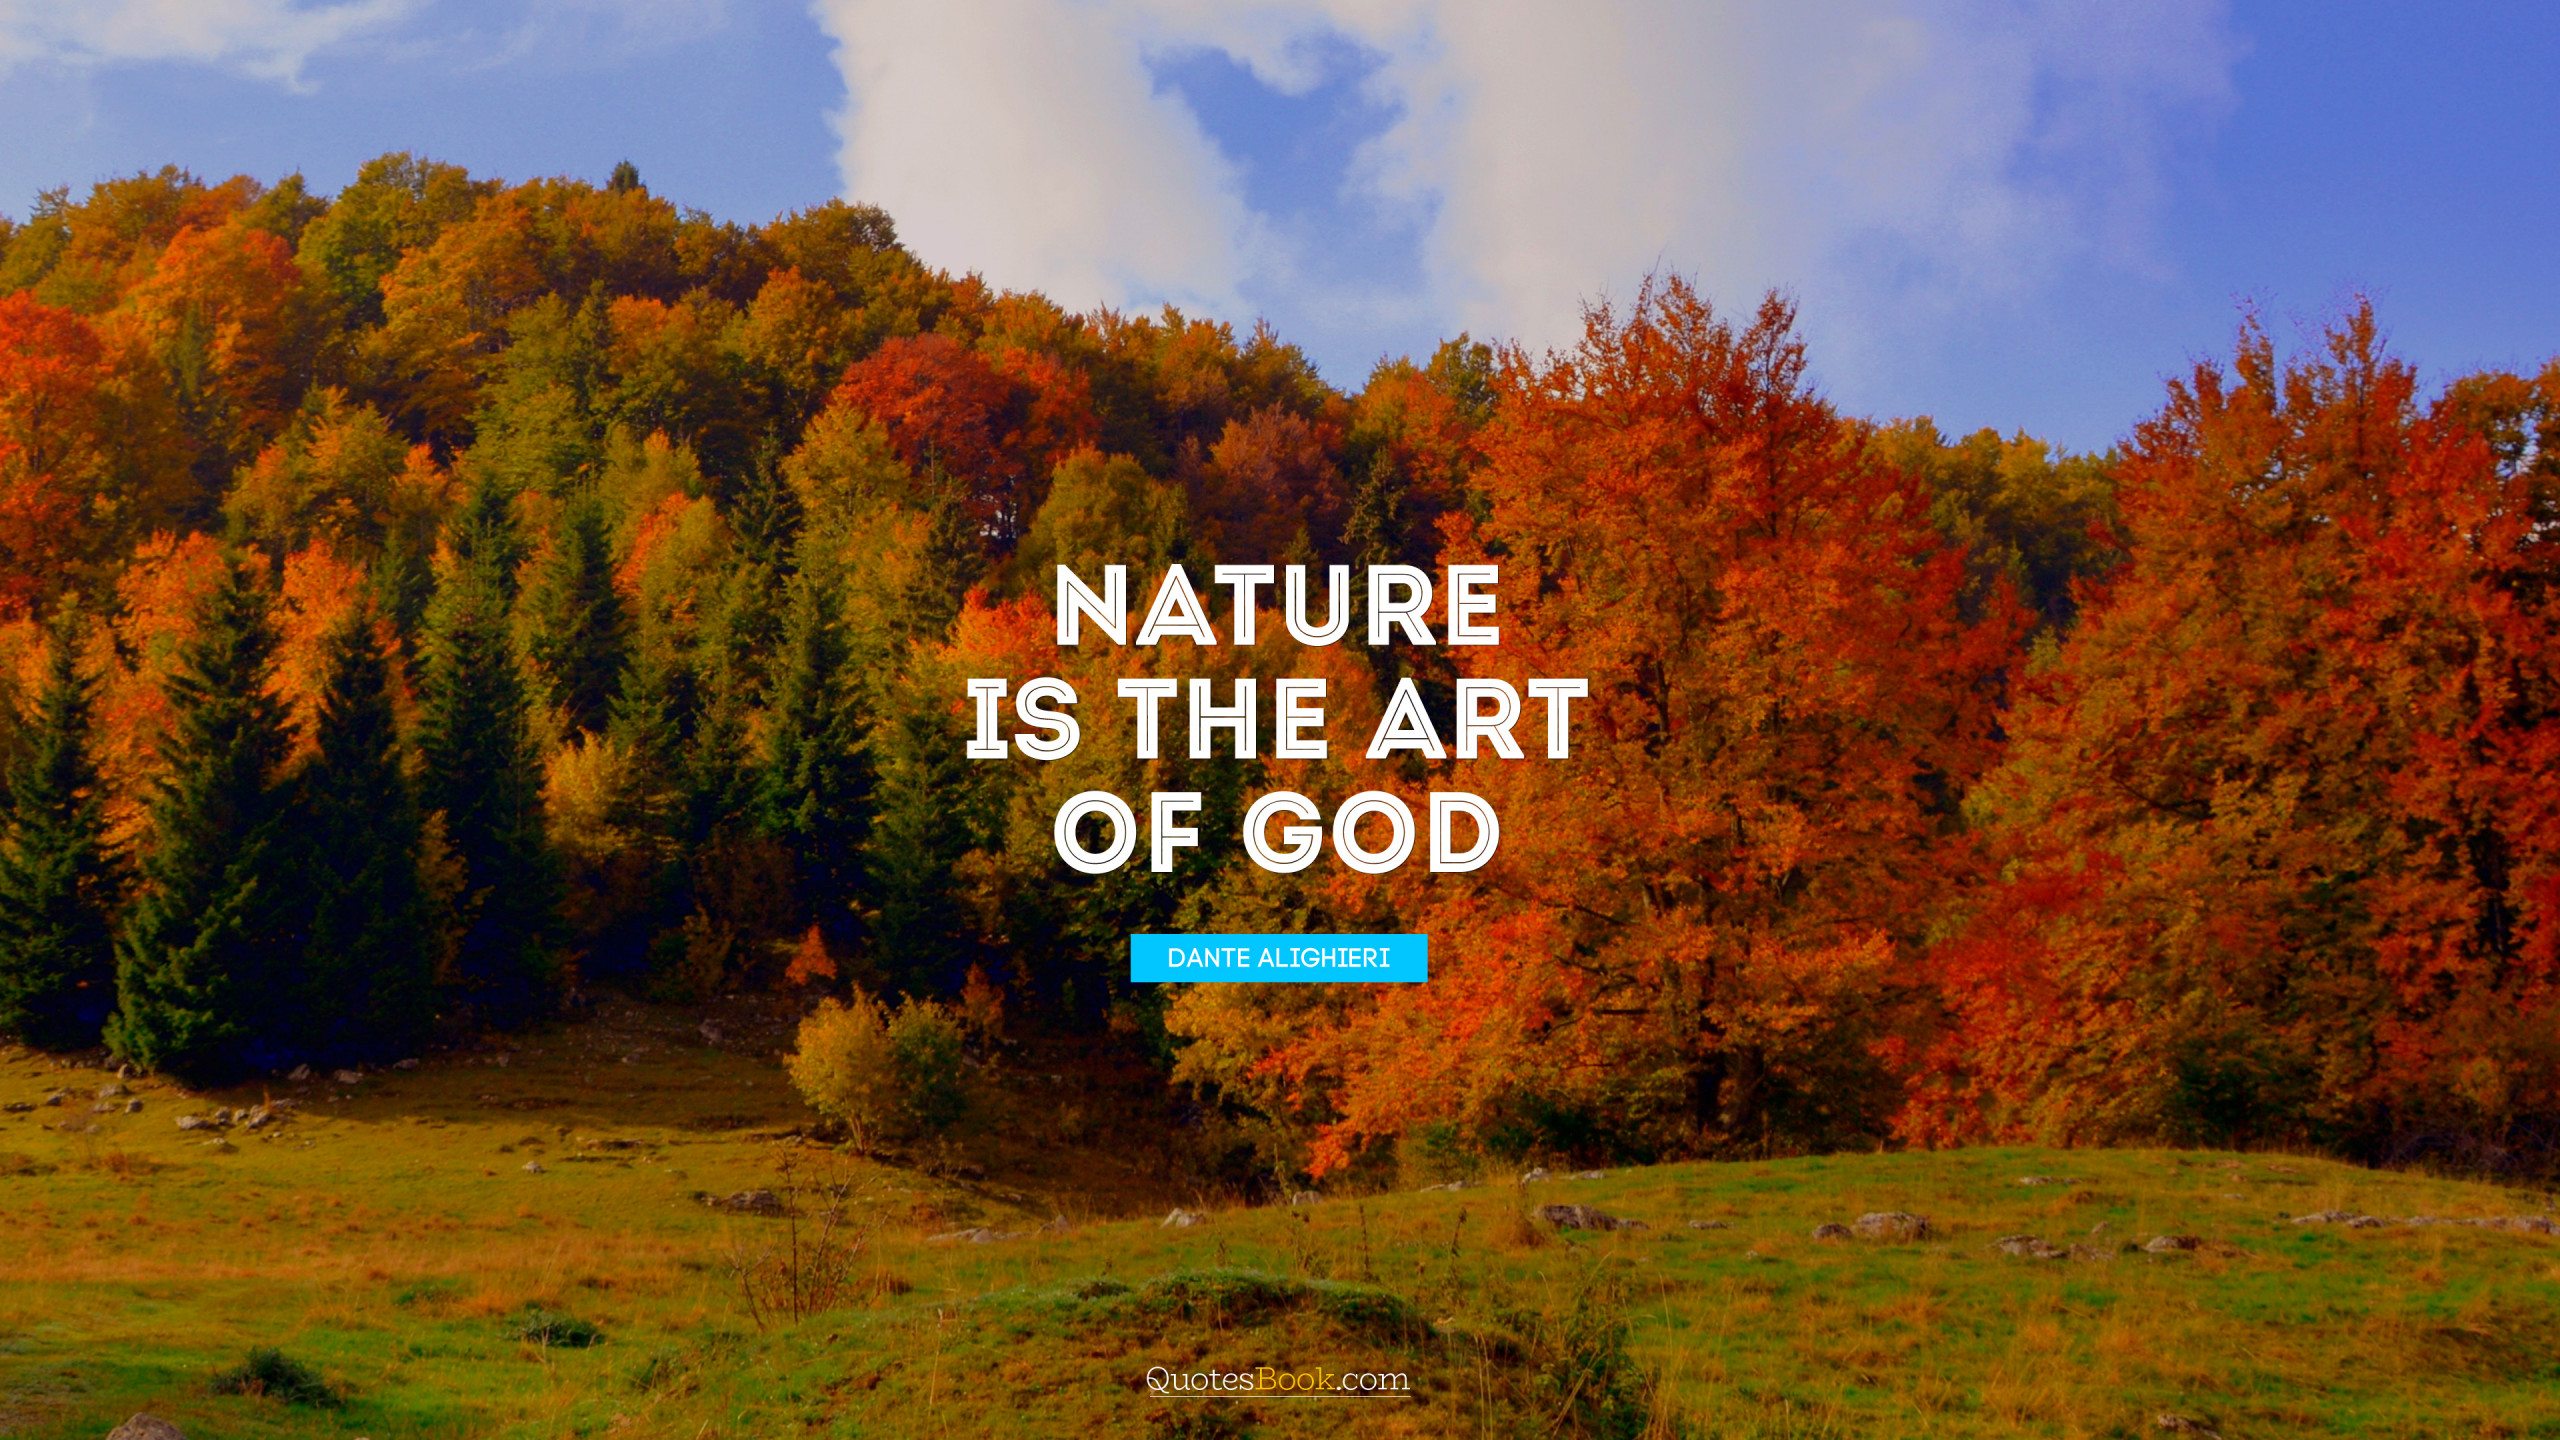 Nature is the art of God. - Quote by Dante Alighieri - QuotesBook